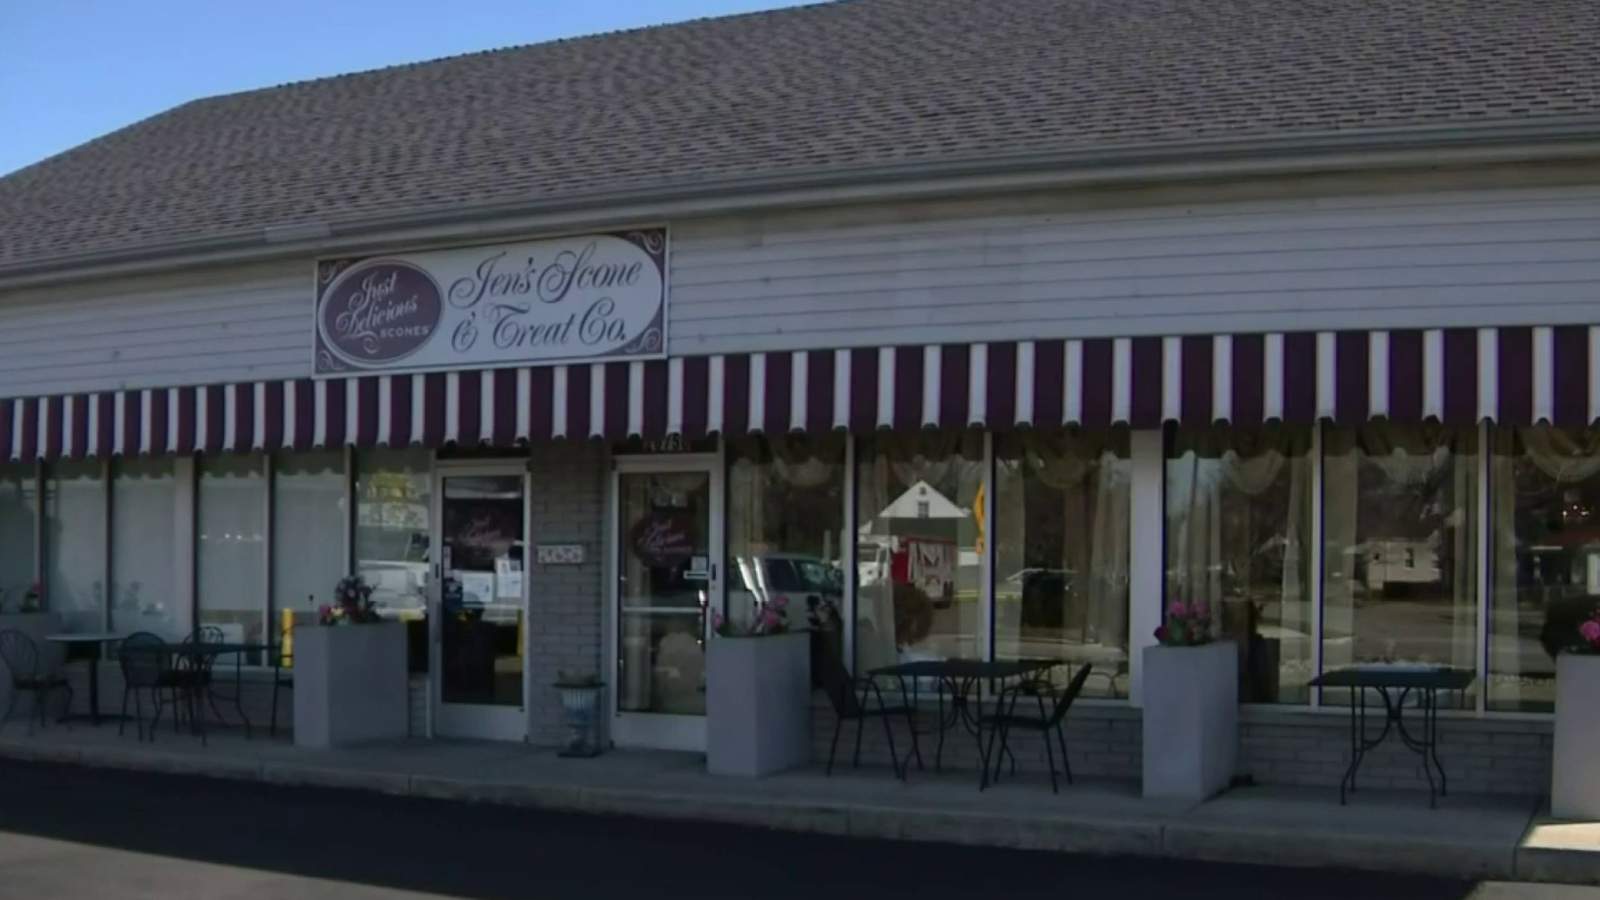 Just Delicious Scones owner grateful after sons step up to keep business open